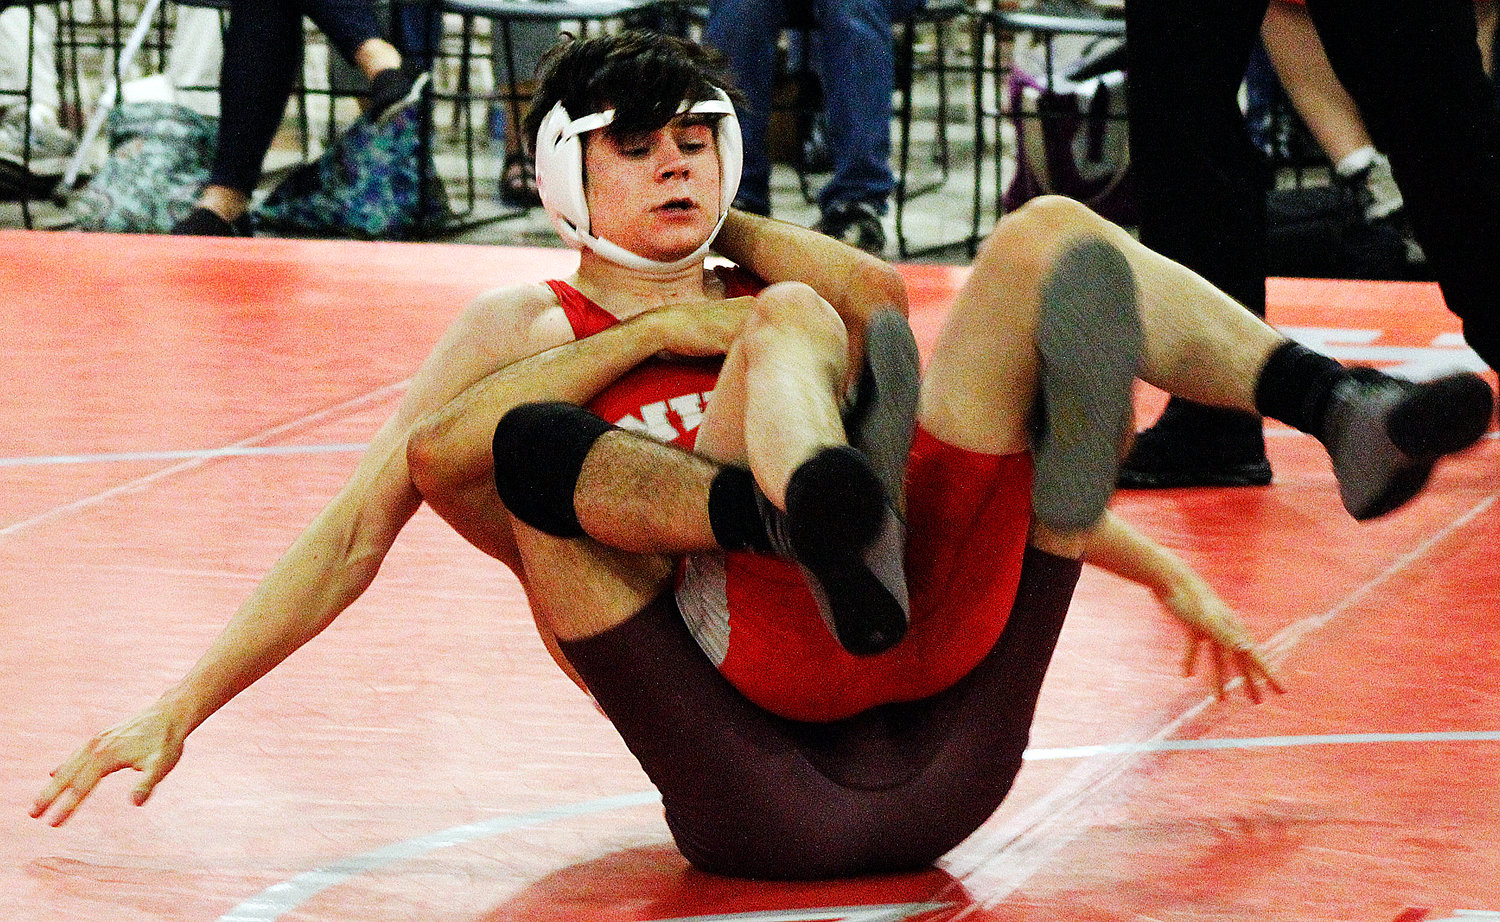 NATE BROWER keeps his balance against a Rogersville opponent.